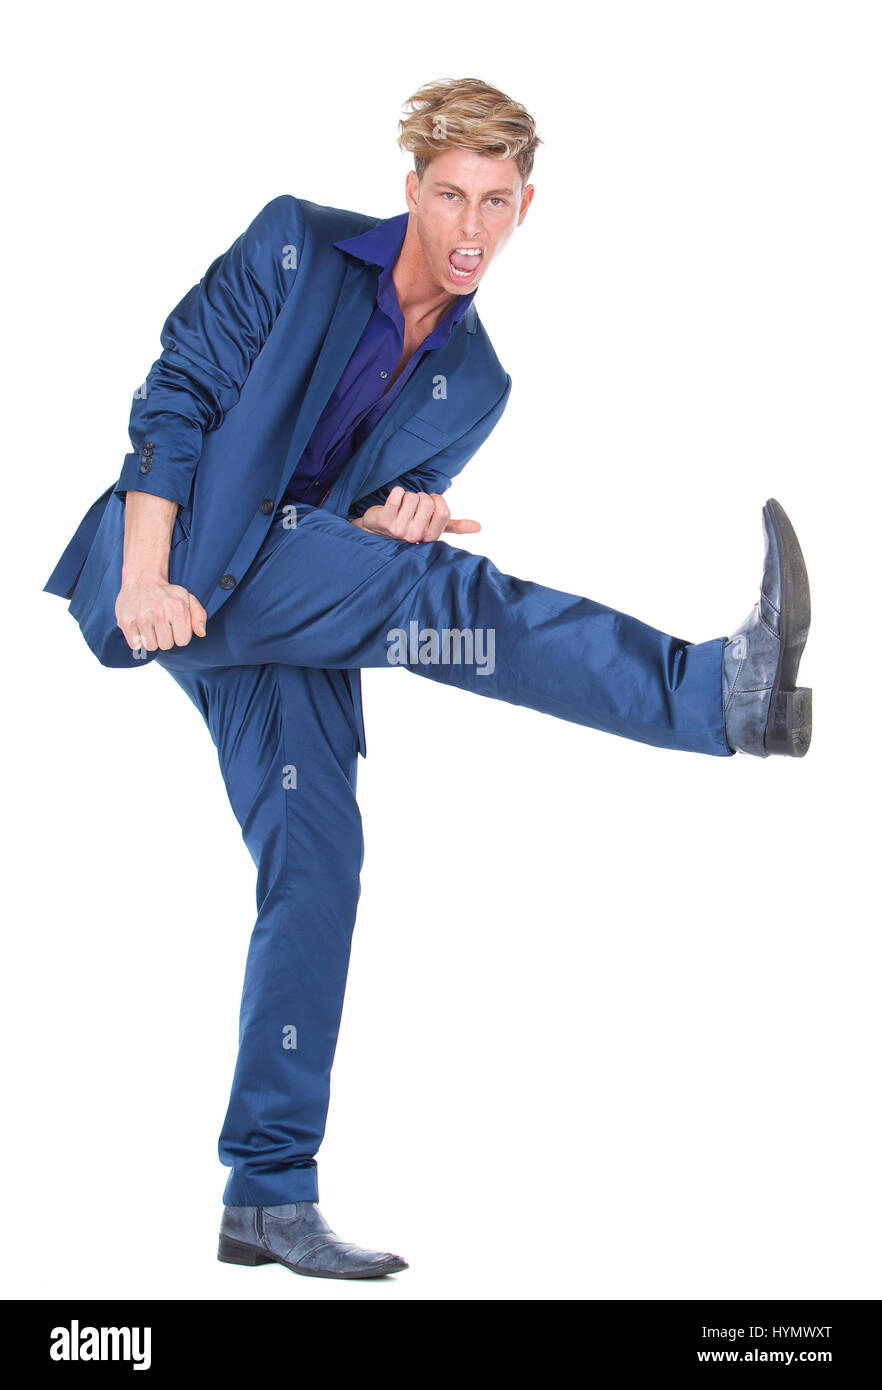 Full length portrait of a young man kicking leg up on isolated white background Stock Photo